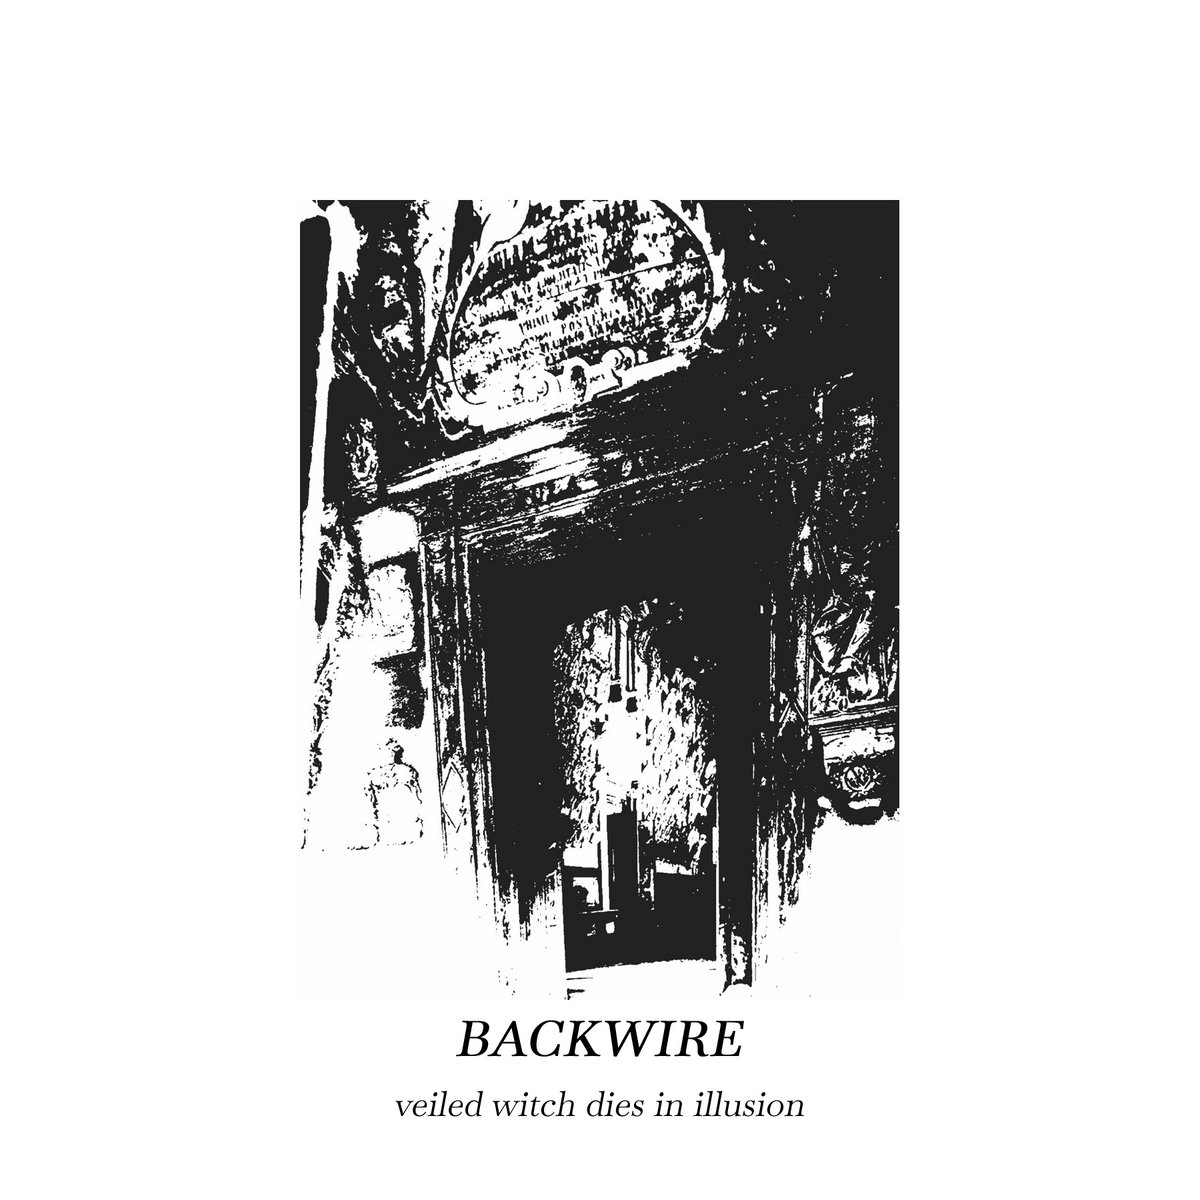 Veiled Witch Dies In Illusion, by Backwire